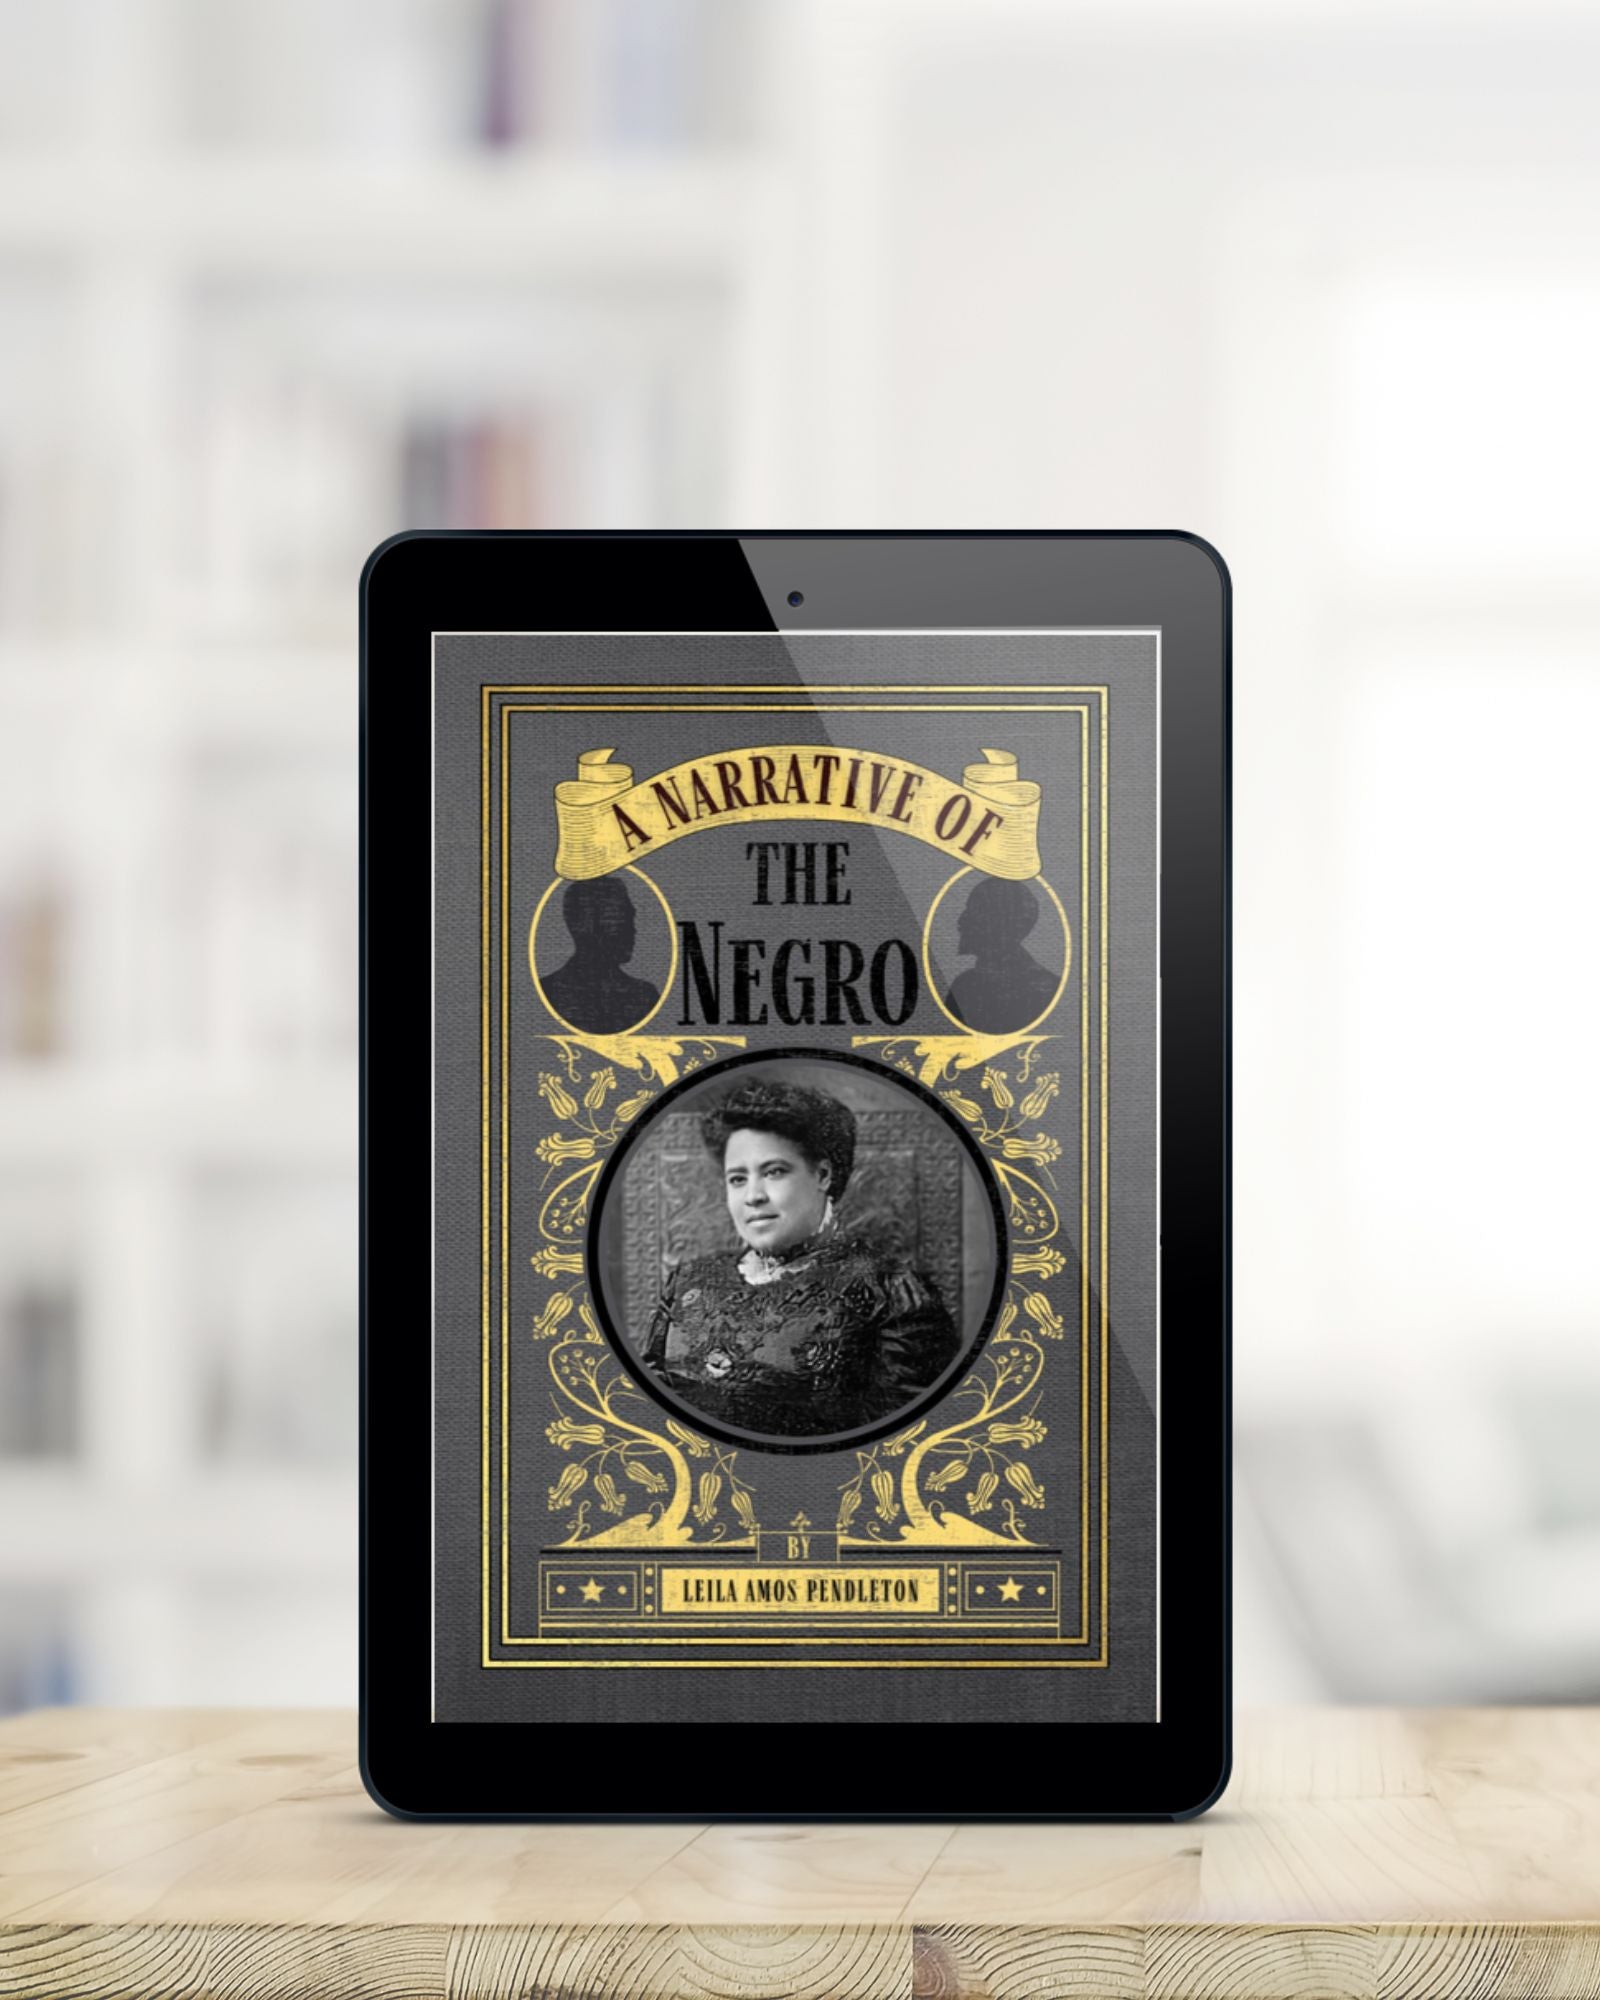 Glossy tablet showing the ebook cover of the grey and yellow A Narrative of the Negro. It is standing on a blonde wood table with the background blurred. 